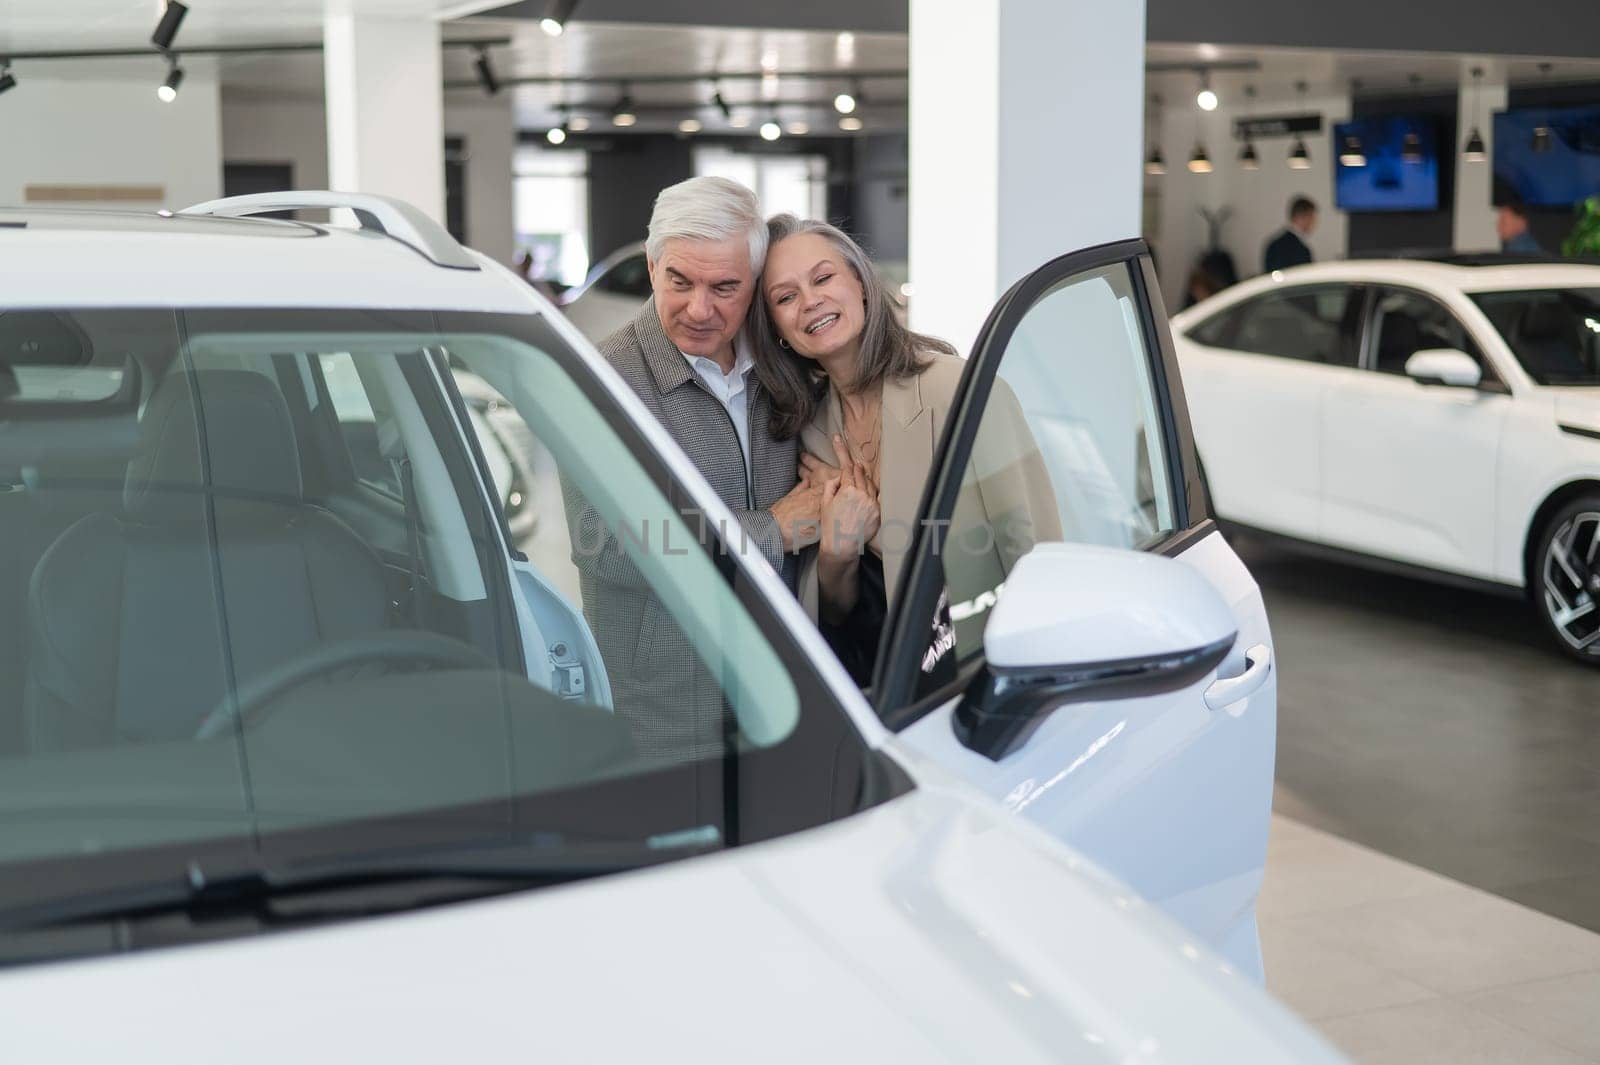 An elderly Caucasian couple chooses a new car at a car dealership. by mrwed54